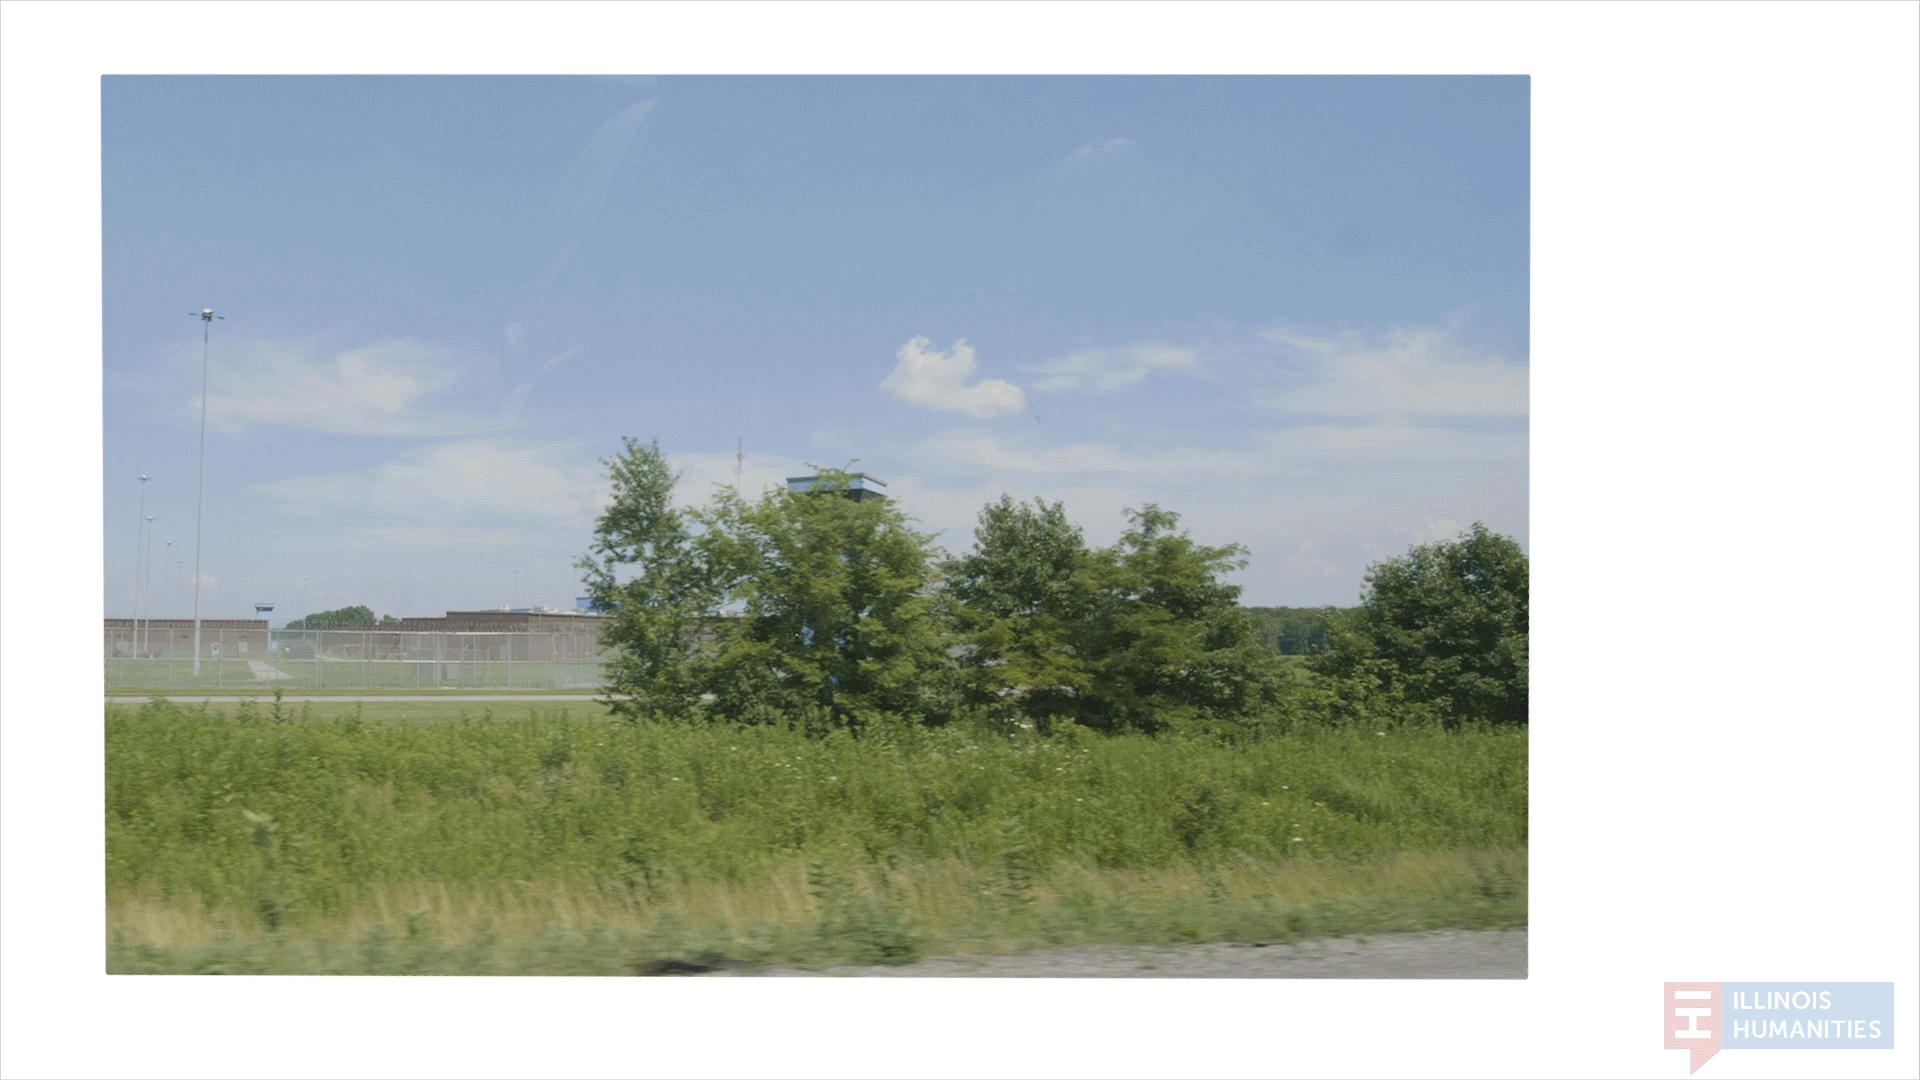 An animated gif of scenes from outside rural Illinois prisons, with green fields and barbed wires.